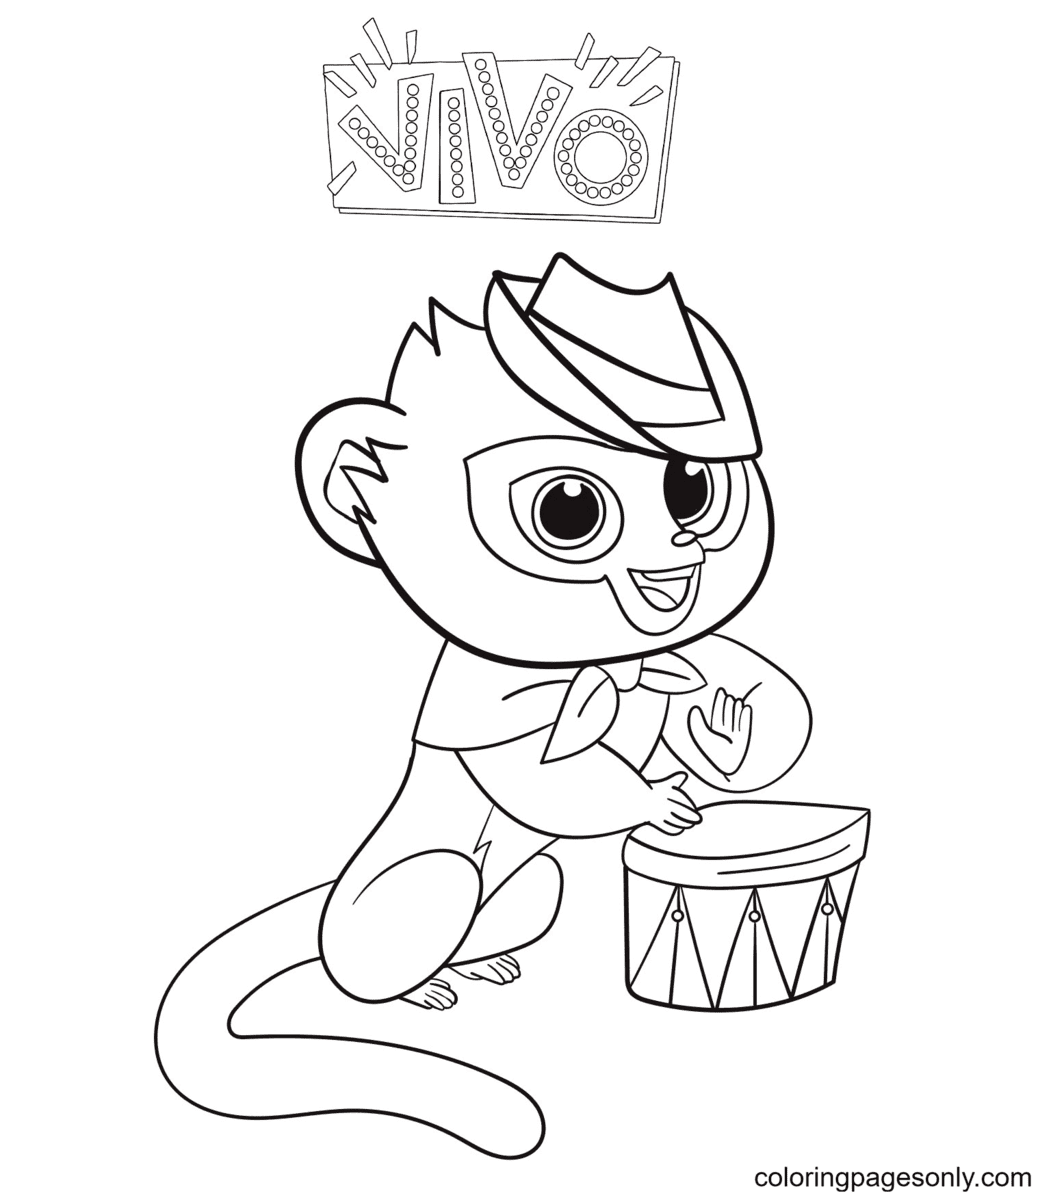 Vivo Coloring Pages - Coloring Pages For Kids And Adults